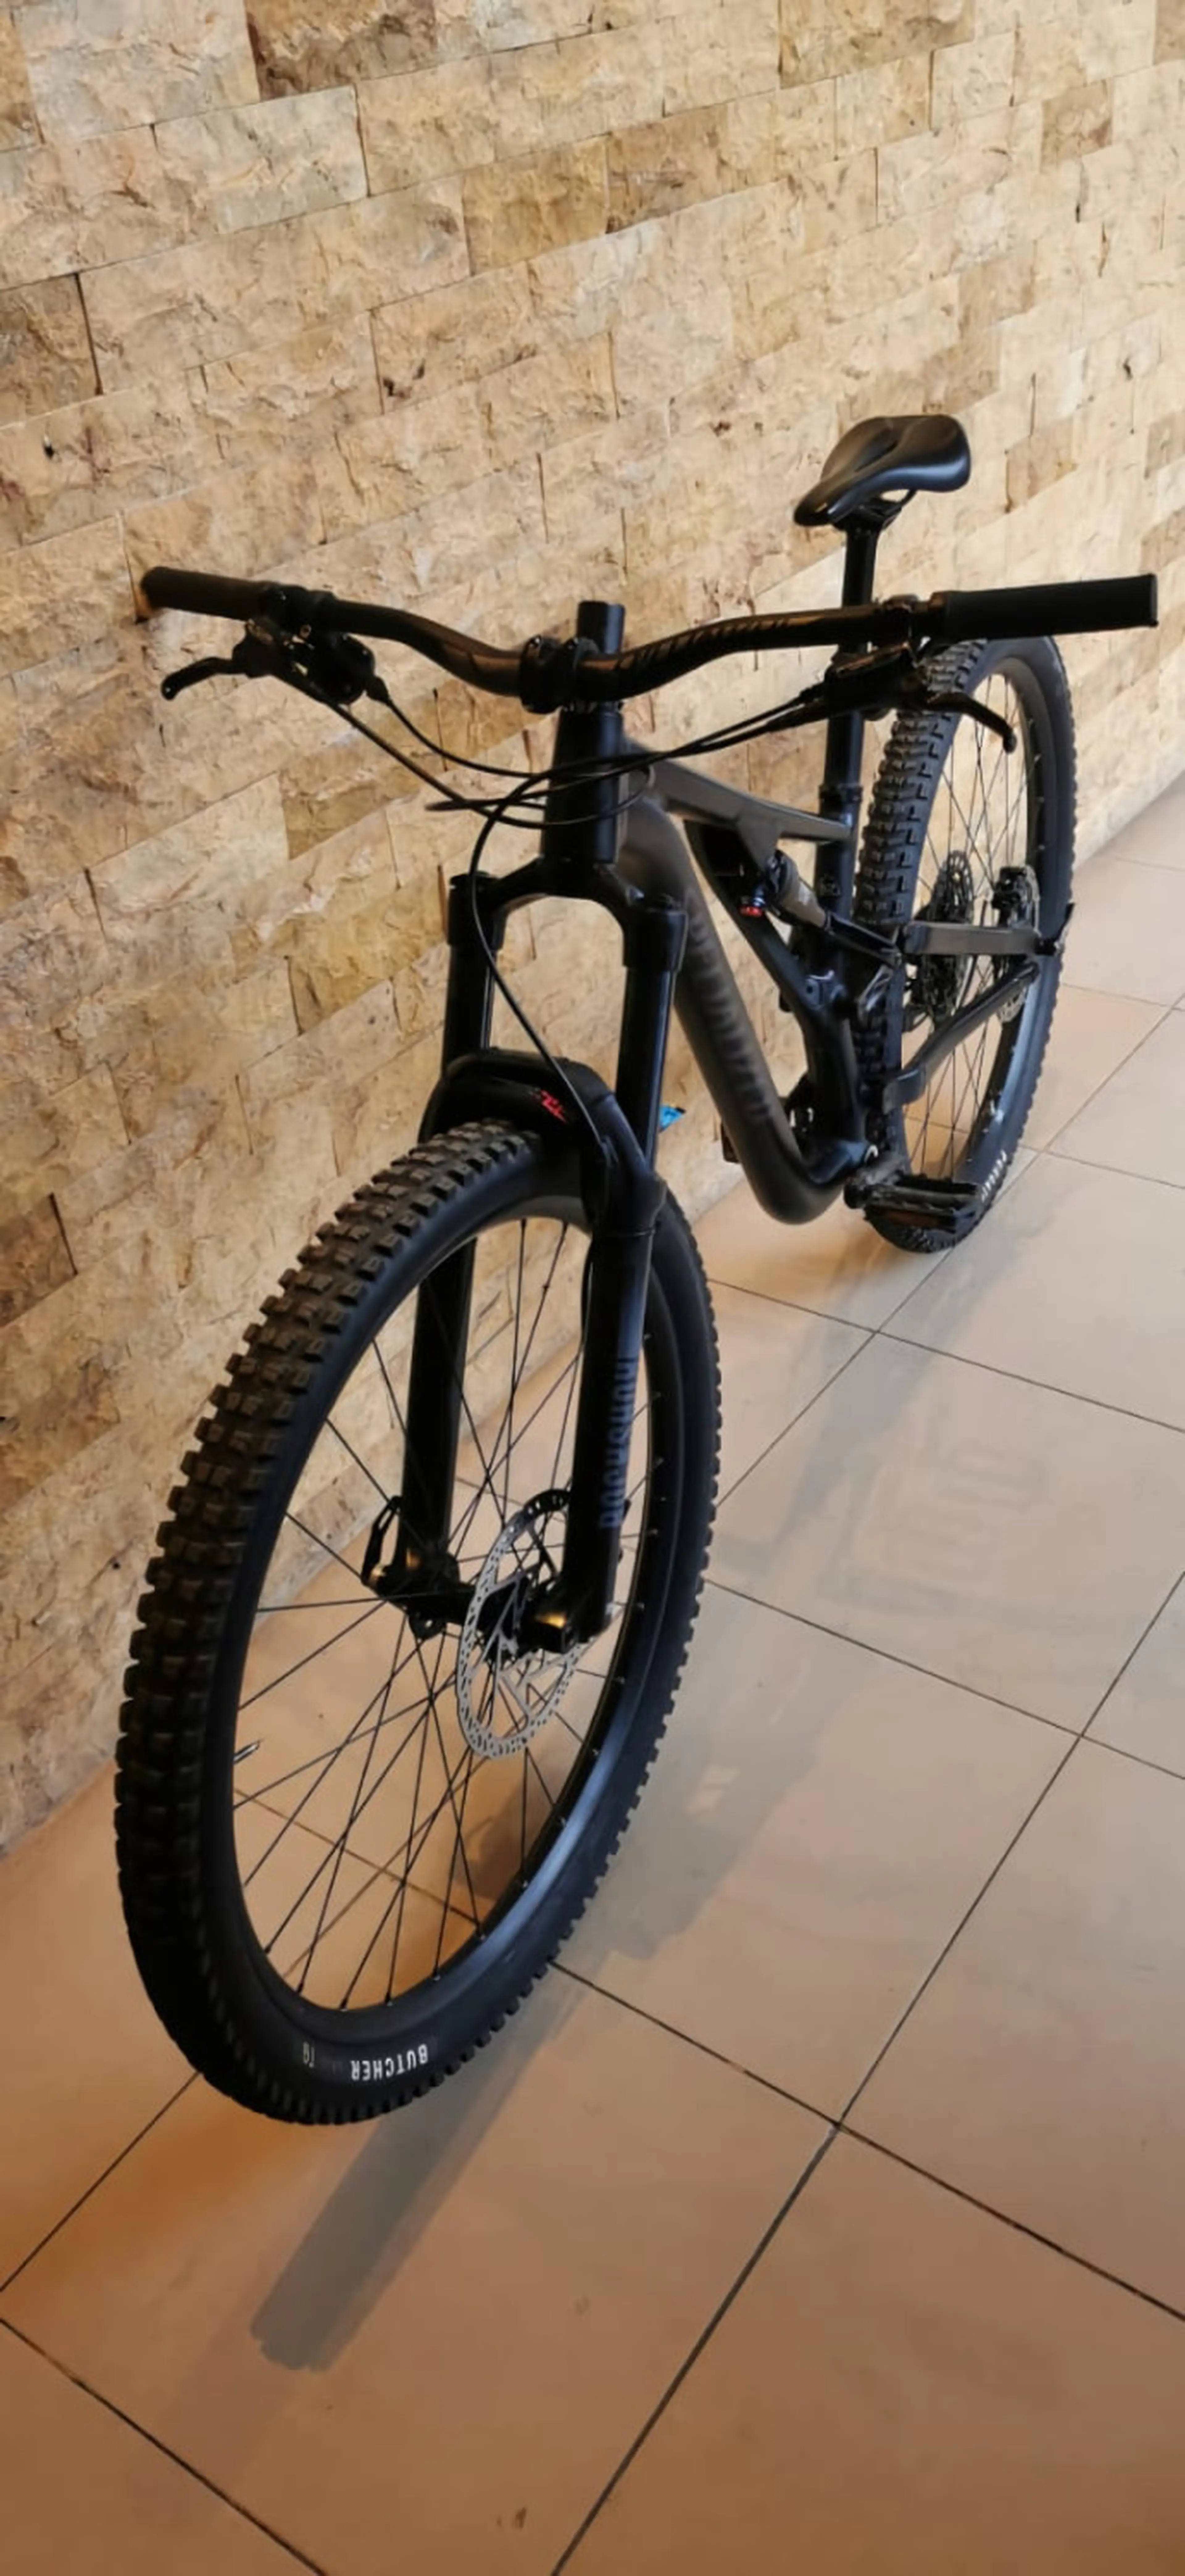 9. Specialized stumpjumper alloy